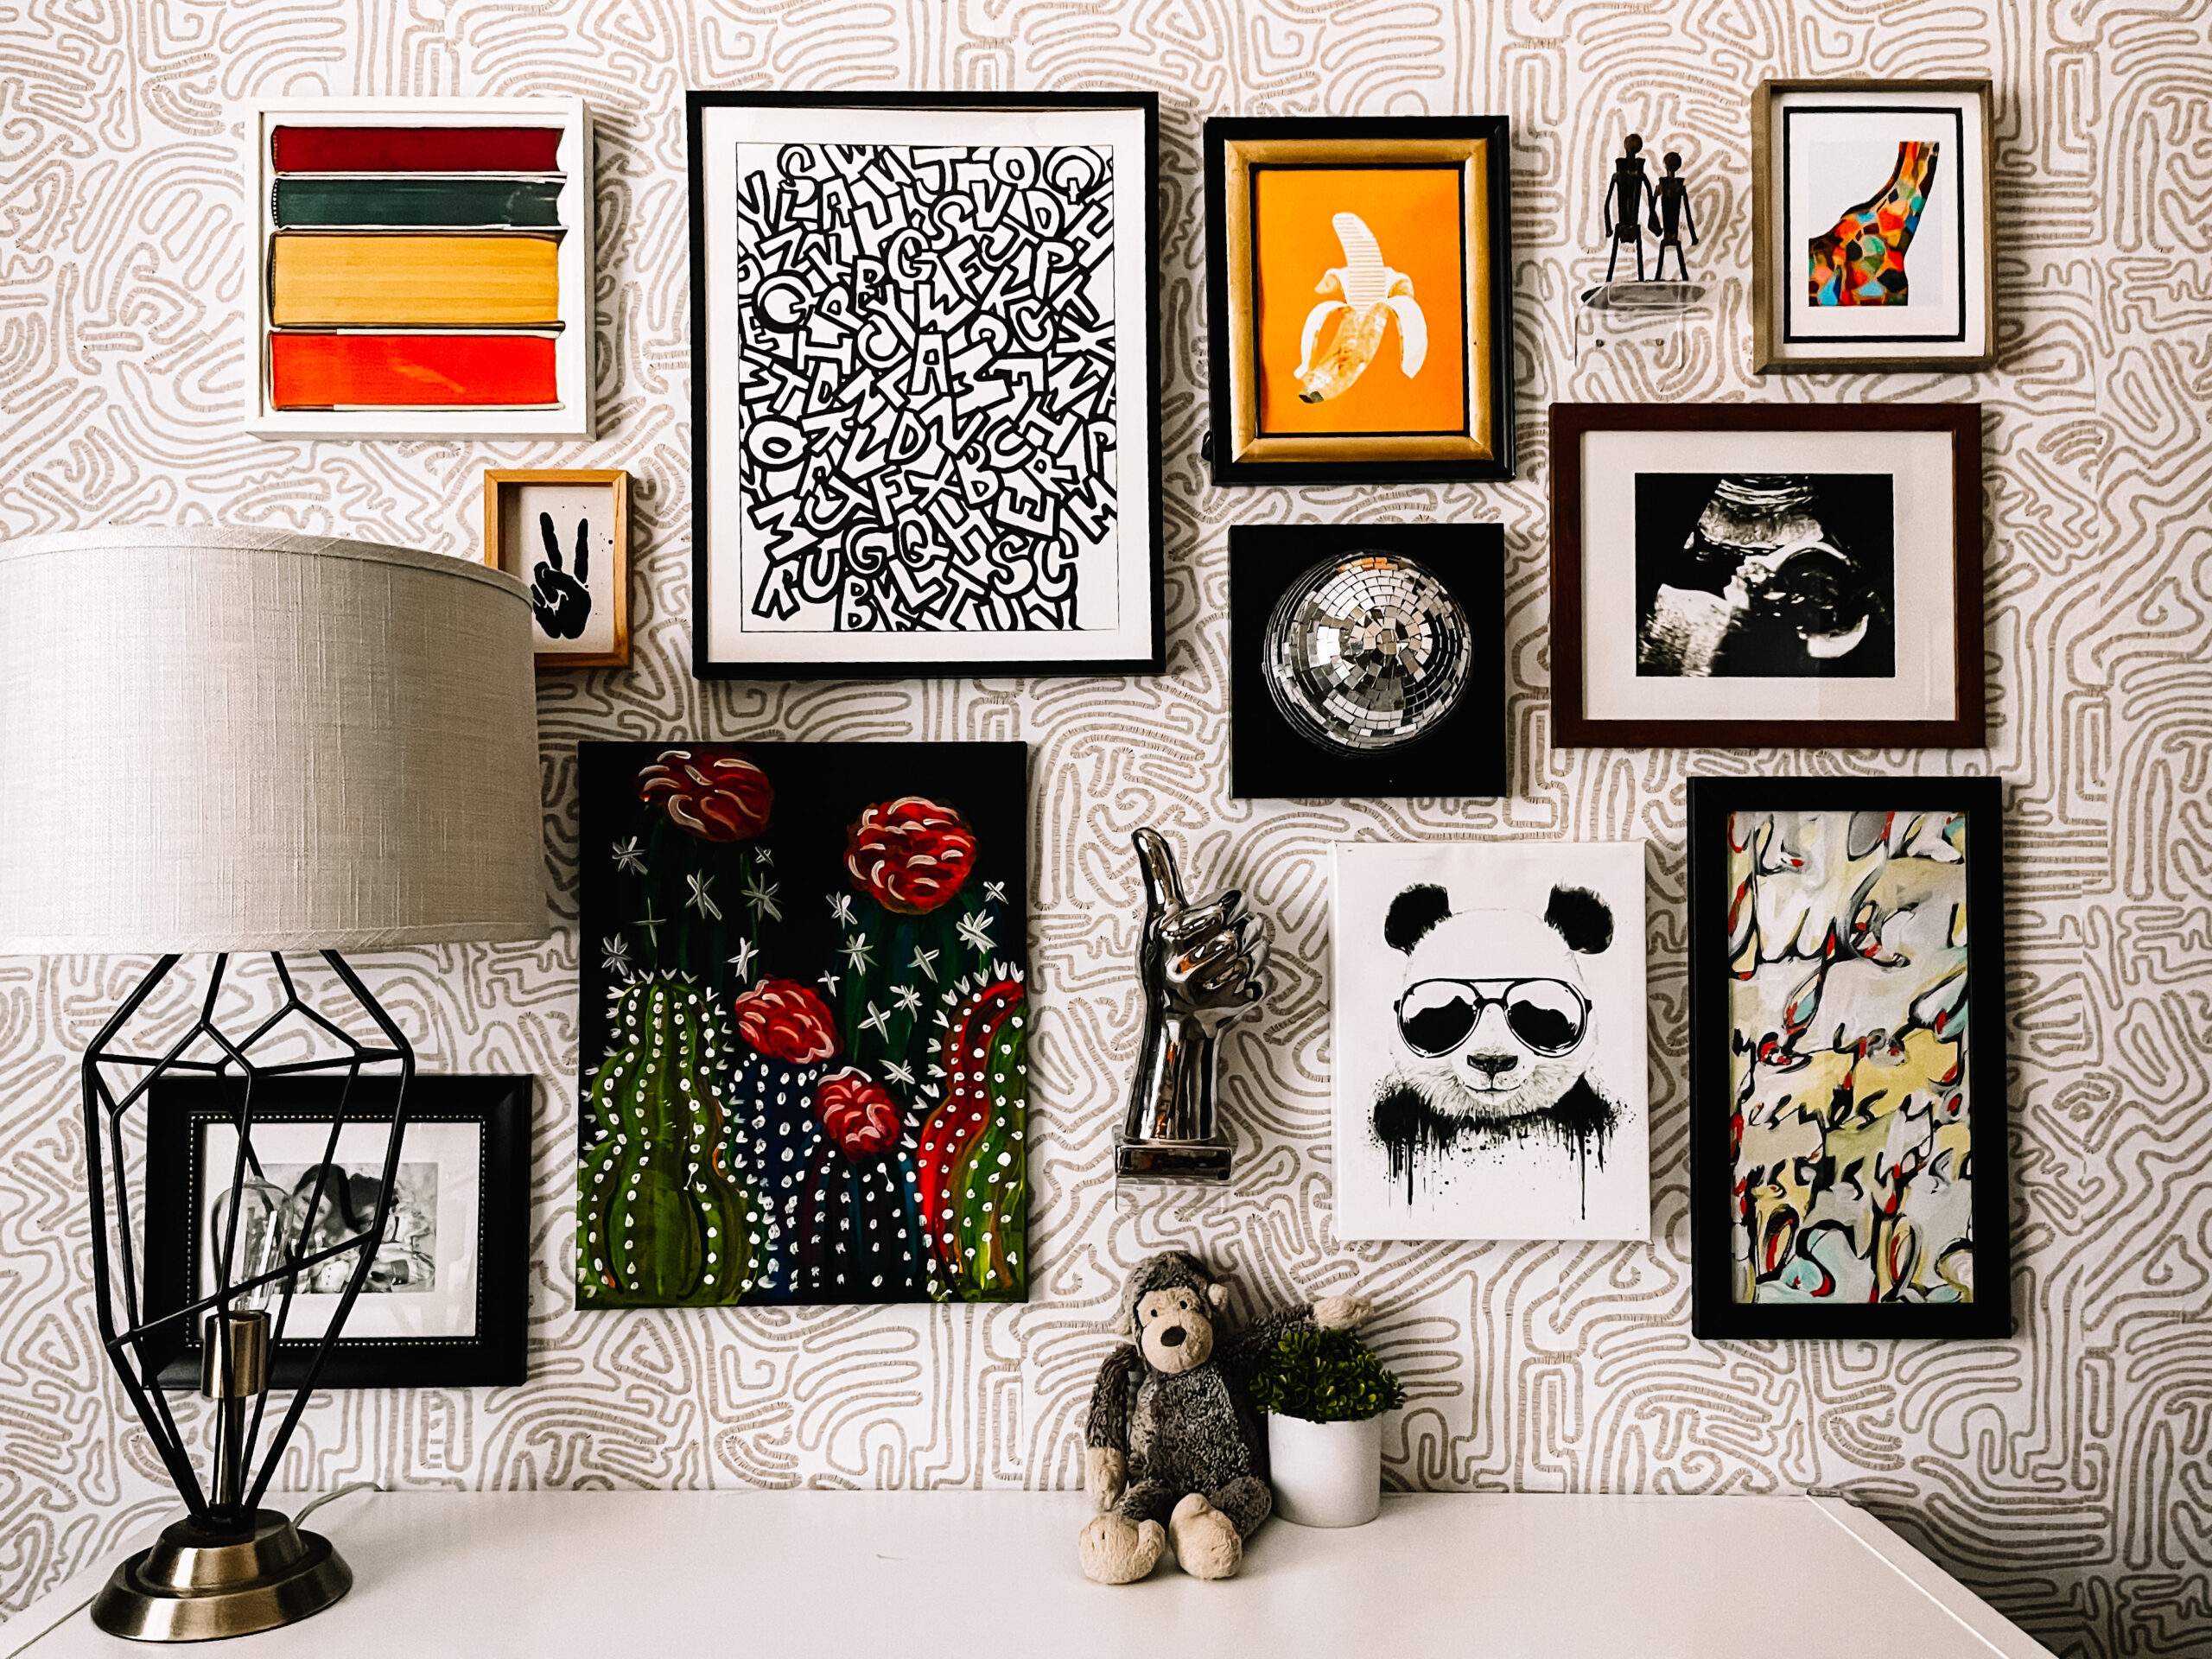 How to create a unique kid's gallery wall - This is our Bliss #bigboyroom